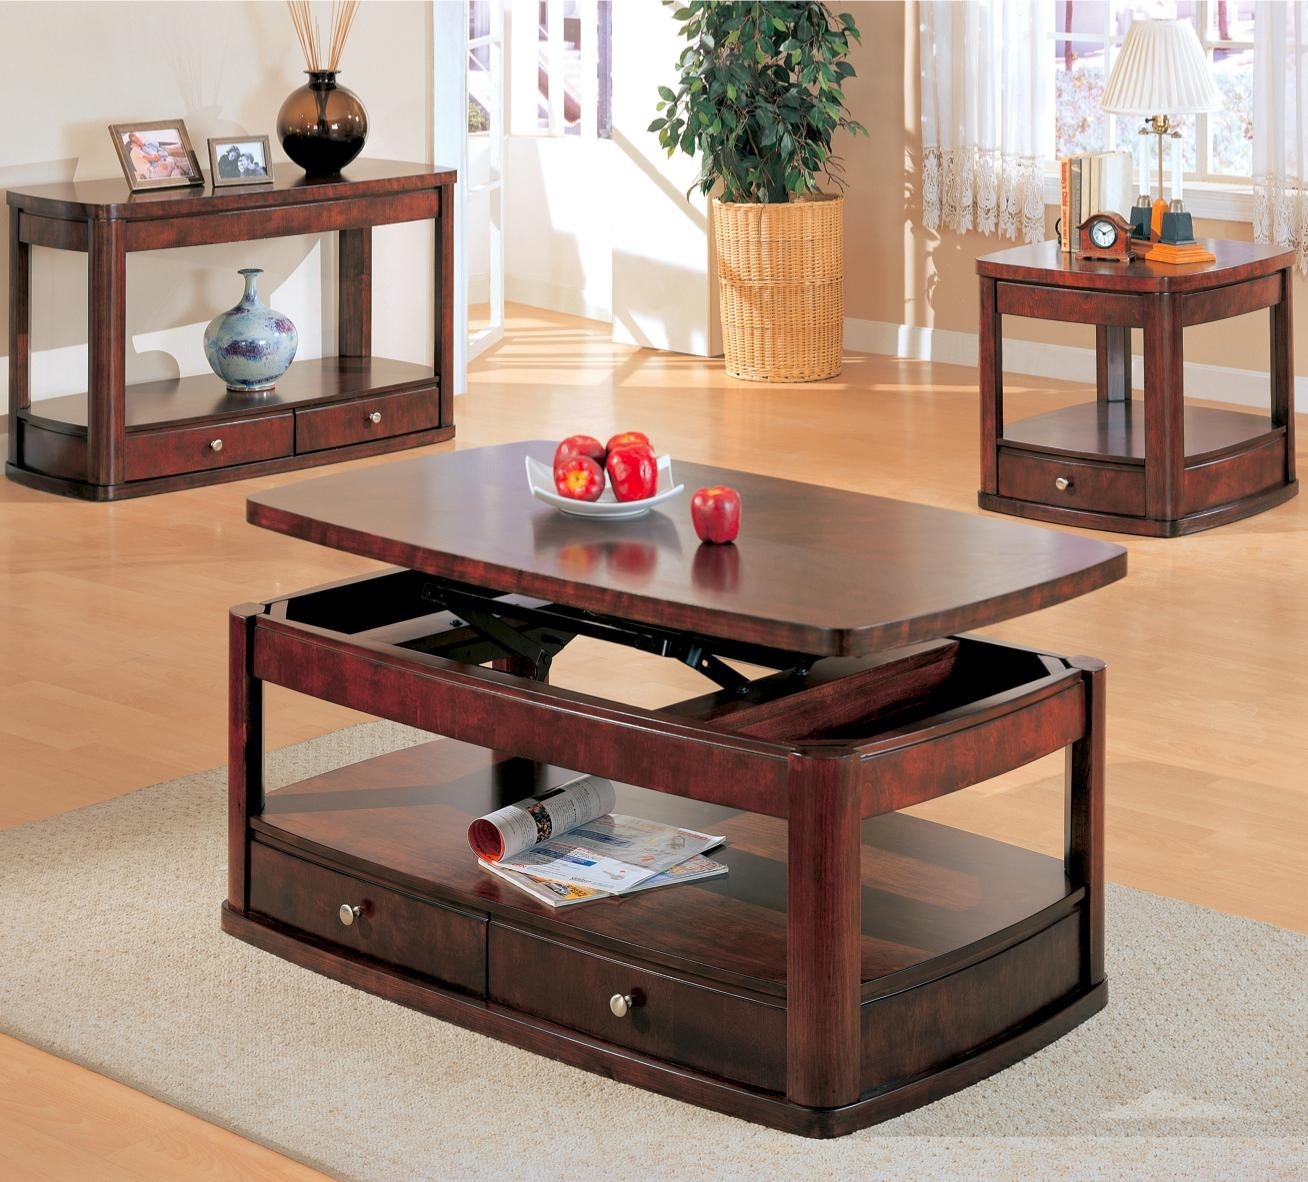 Evans merlot coffee table with lift top and storage drawers